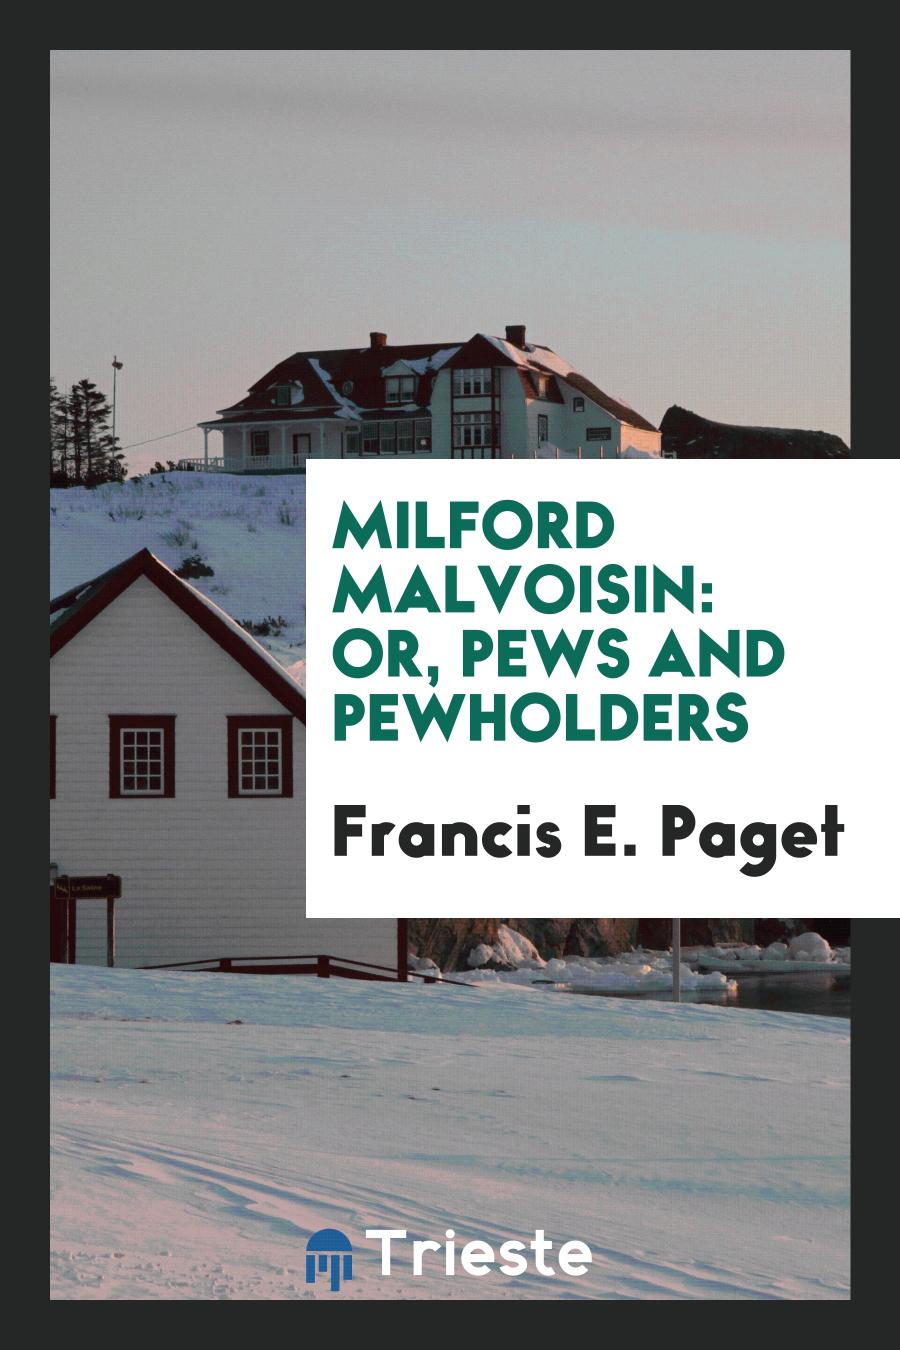 Milford Malvoisin: or, Pews and pewholders